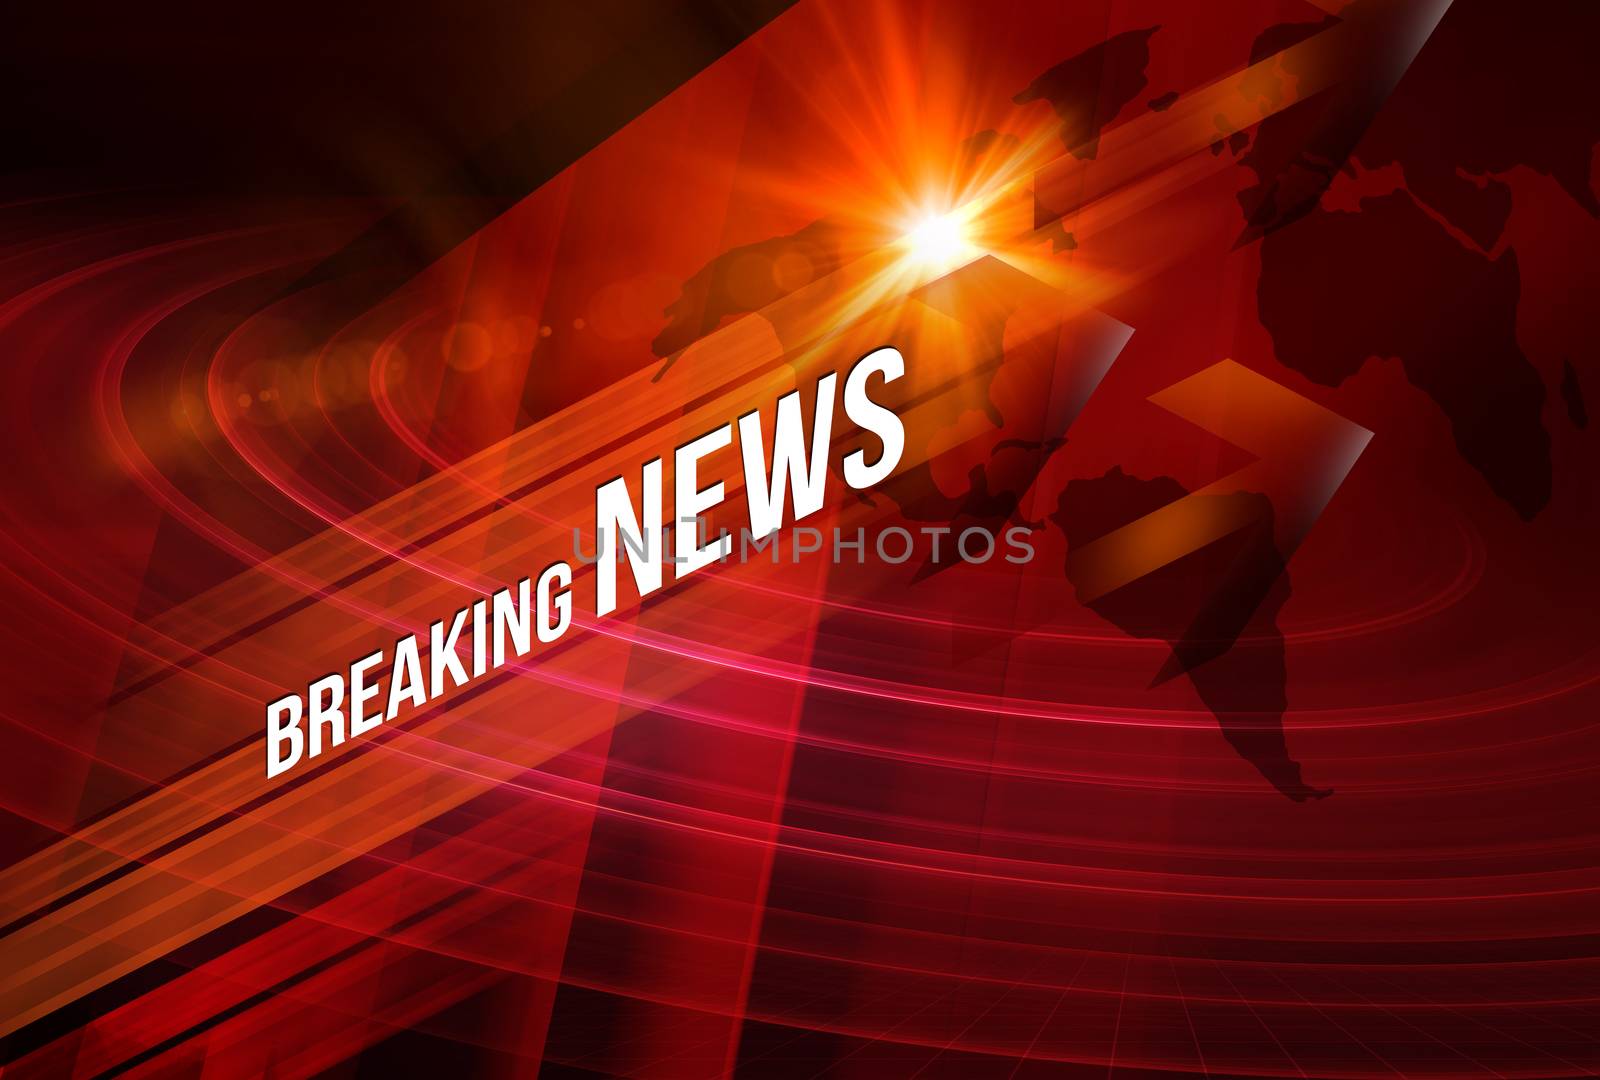 Graphical Breaking News Background with news text, Red Theme Background with White Breaking News.